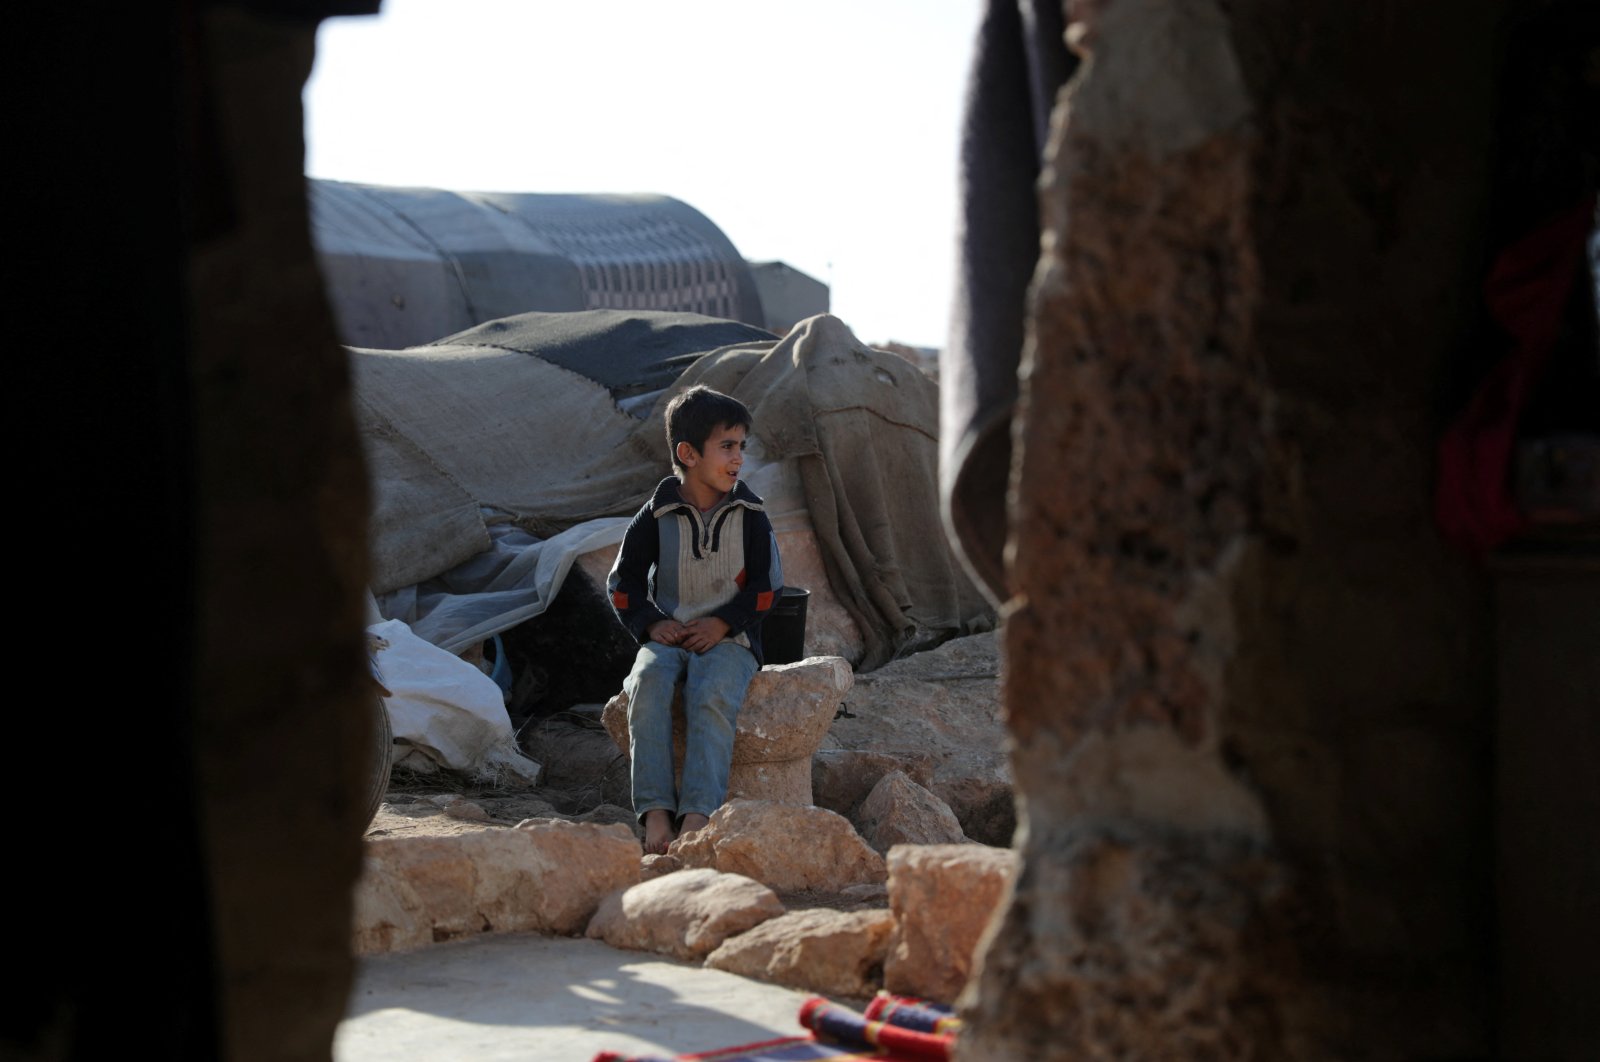 Mohammed Shiban, 7, sits on top of an ancient stone in front of the room his father Ahmad Shiban, 35, built at the UNESCO World Heritage Site of Babisqa, in the northern countryside of Idlib, Syria, Dec. 6, 2021. (REUTERS Photo)